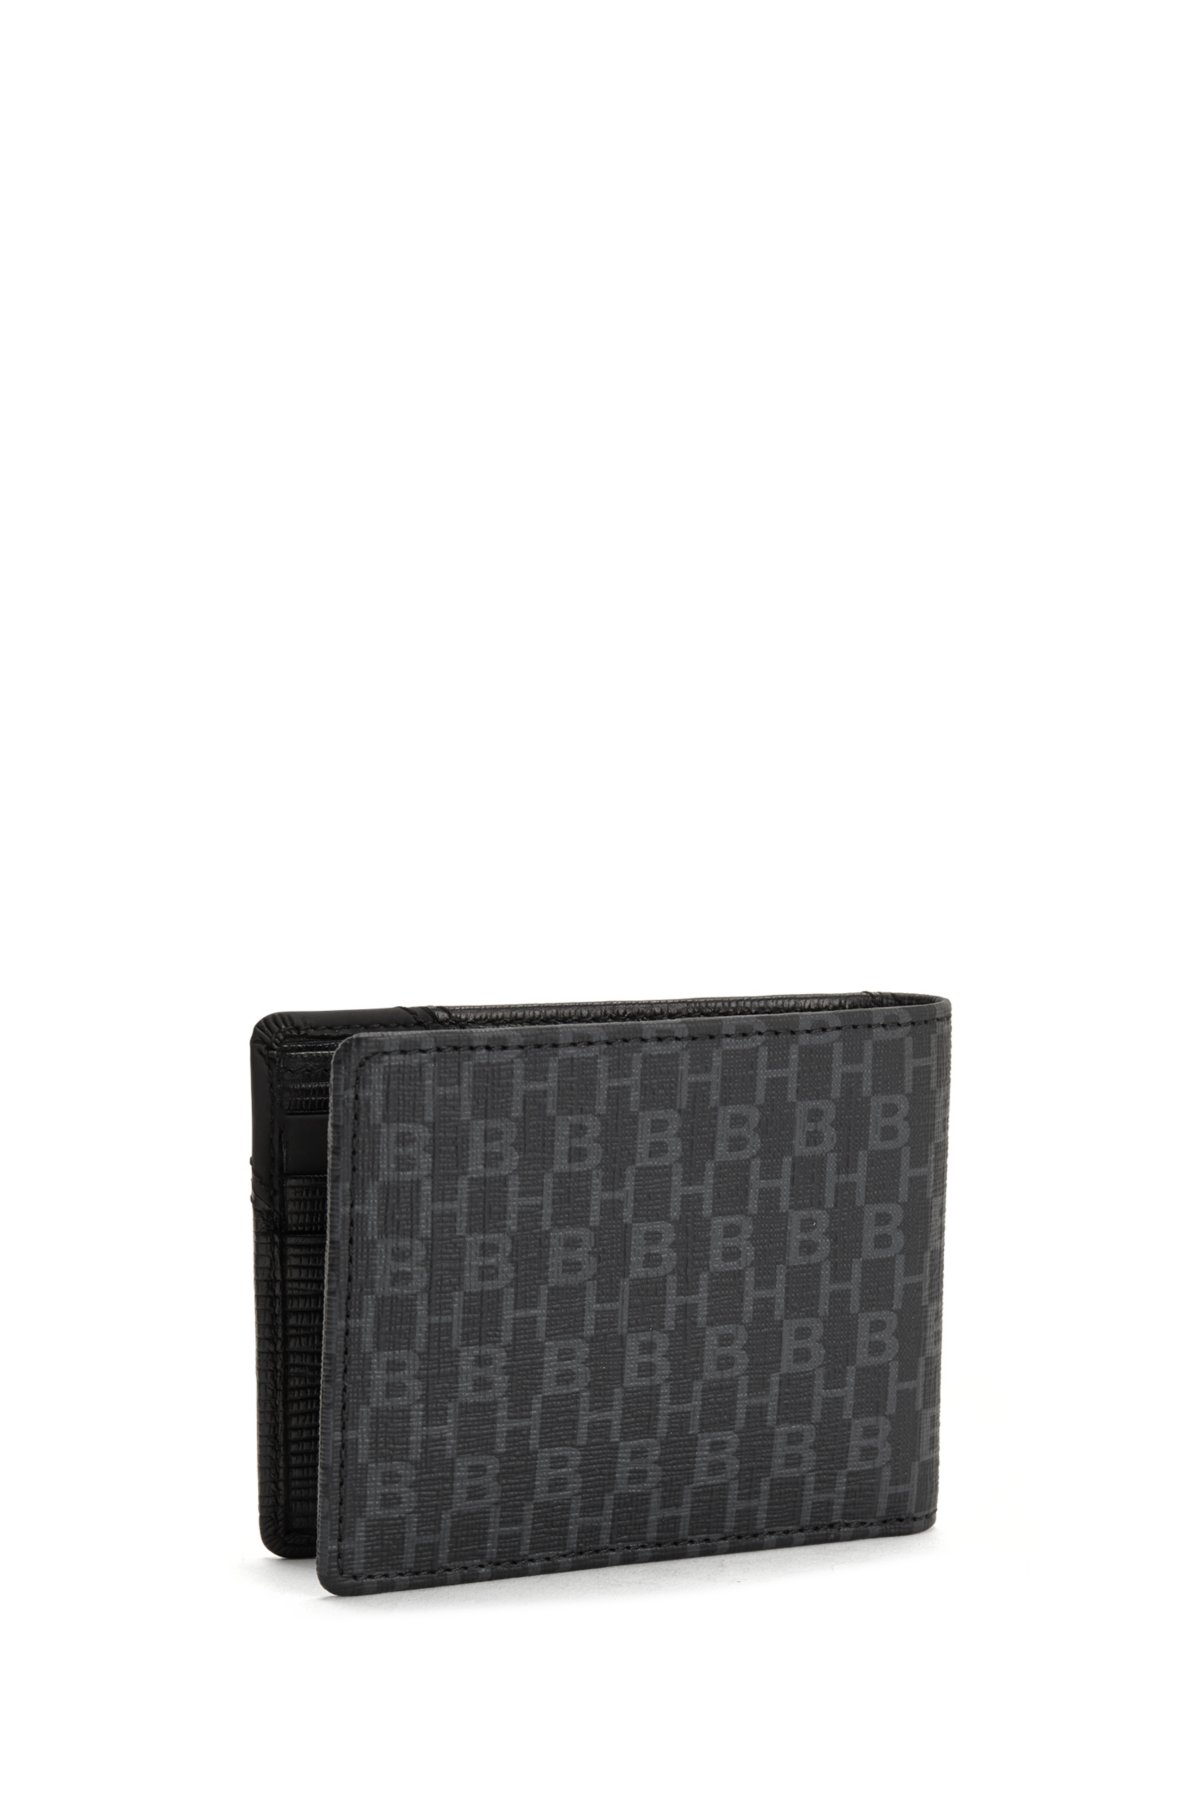 Unauthenticated Louis Vuitton Supreme Wallet, 45% OFF